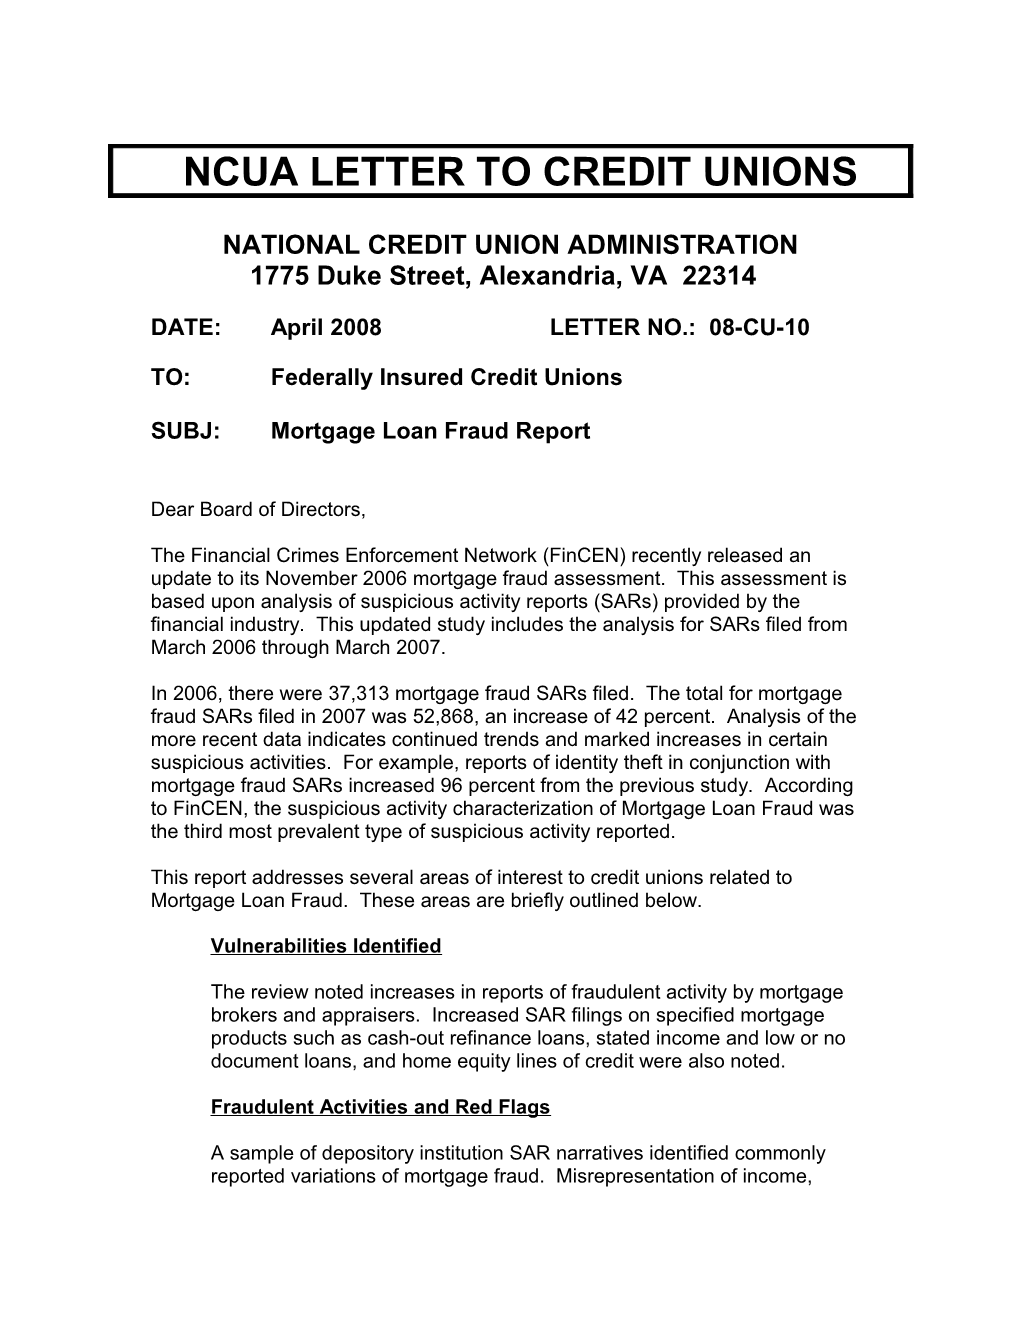 Letter to Credit Union 07-CU-09